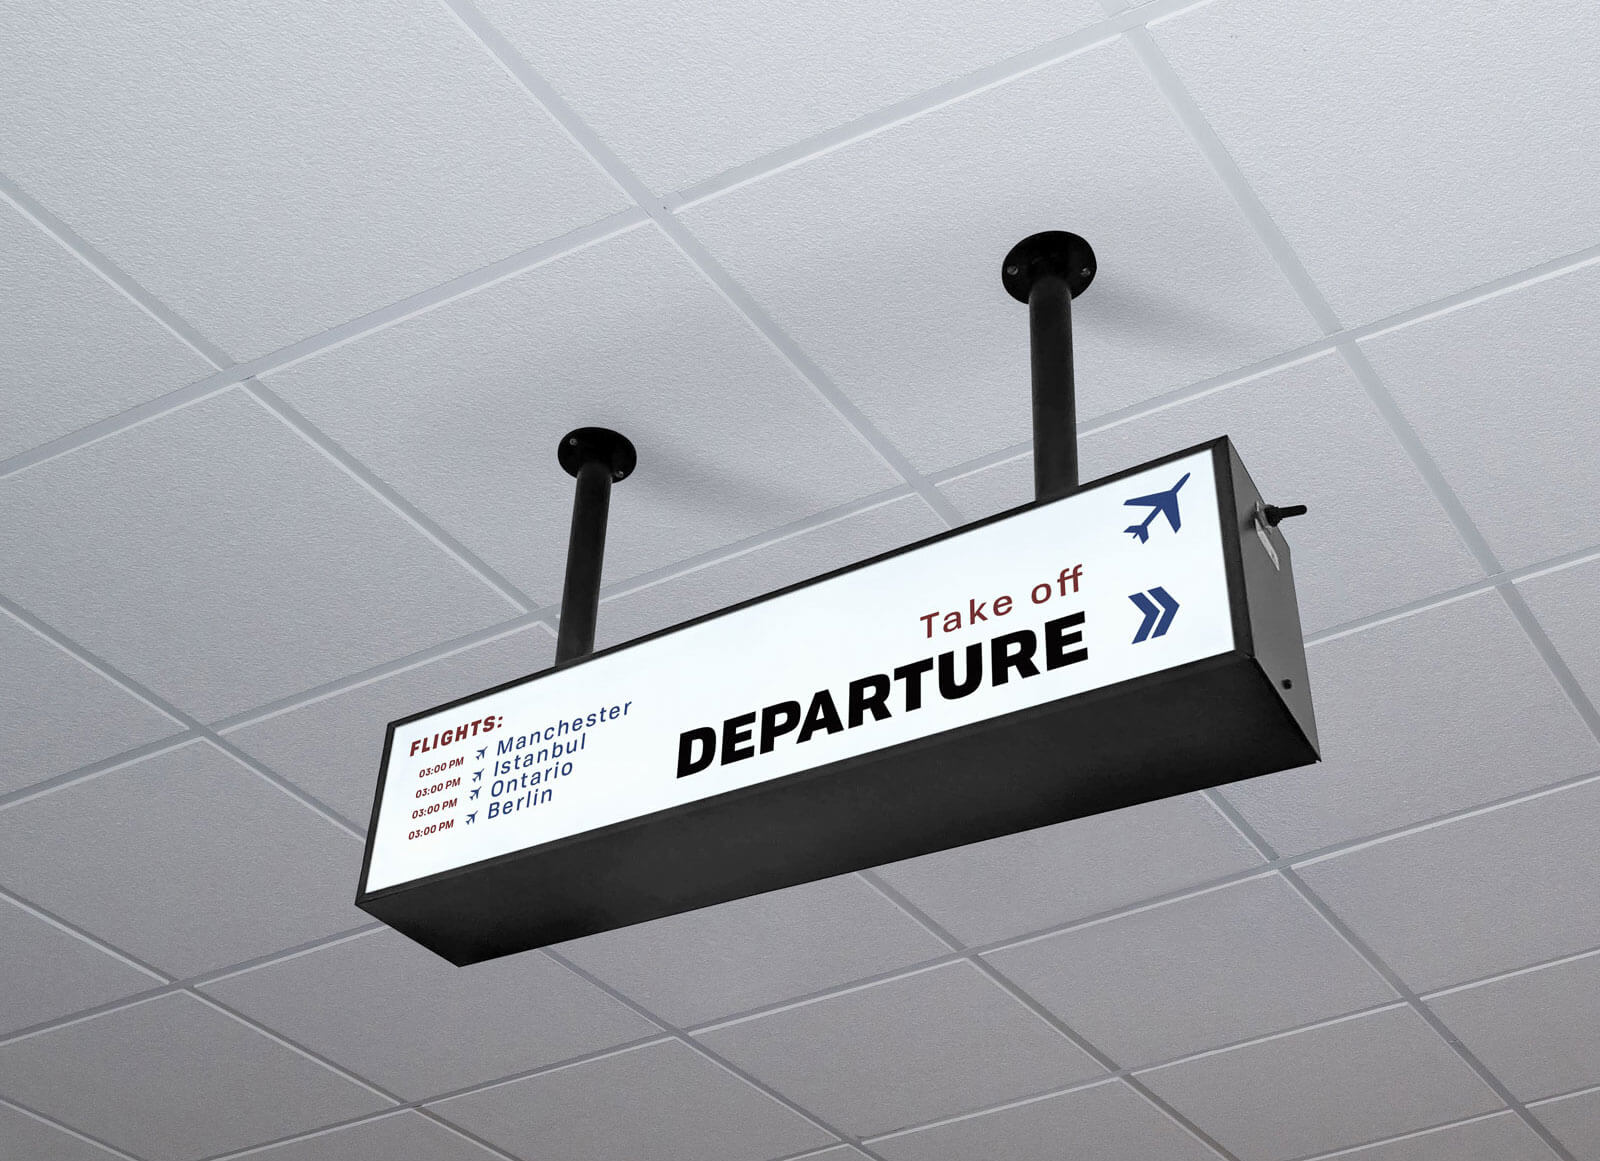 Download Free Arrival / Departure Airport Signage Mockup PSD - Good ...